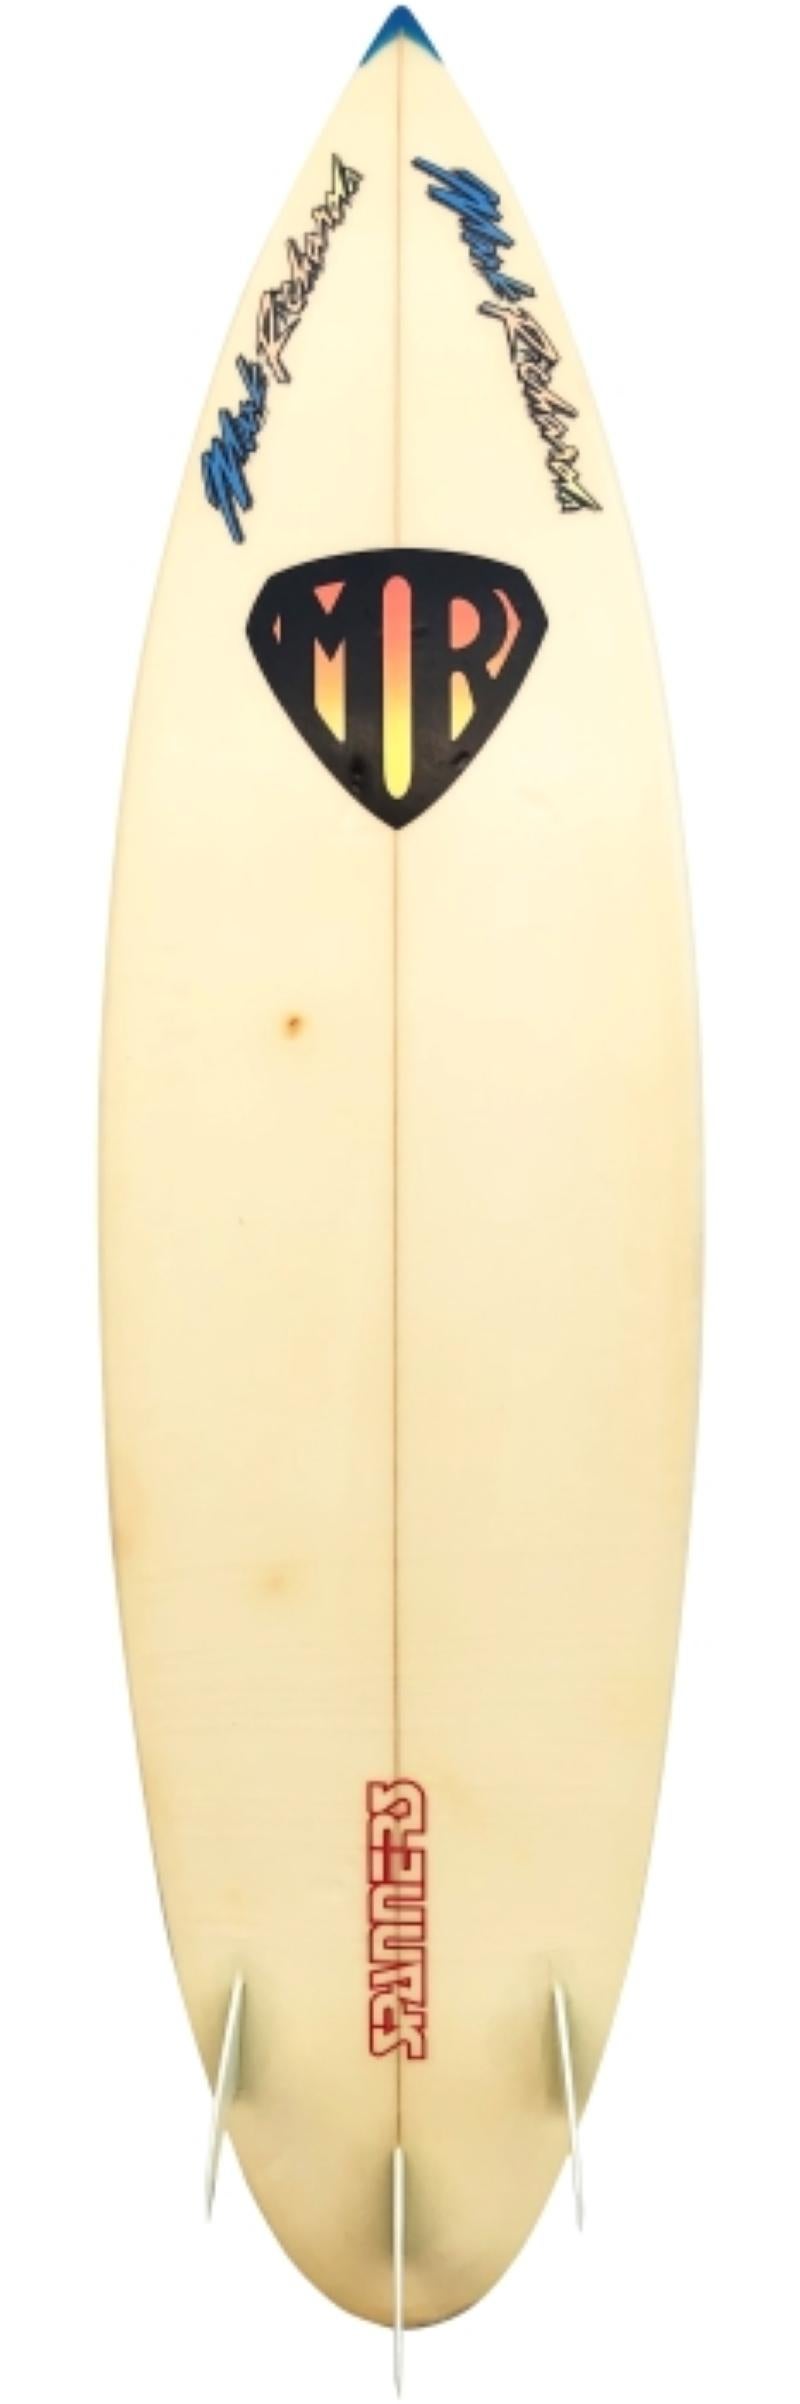 1988 Mark Richards (MR) surfboard. Features 80s style colorful Mark Richards text and iconic MR Superman logos. Rounded pintail shape design with glassed on thruster (tri-fin) setup. A very clean example of a 1980s surfboard shaped under the premier